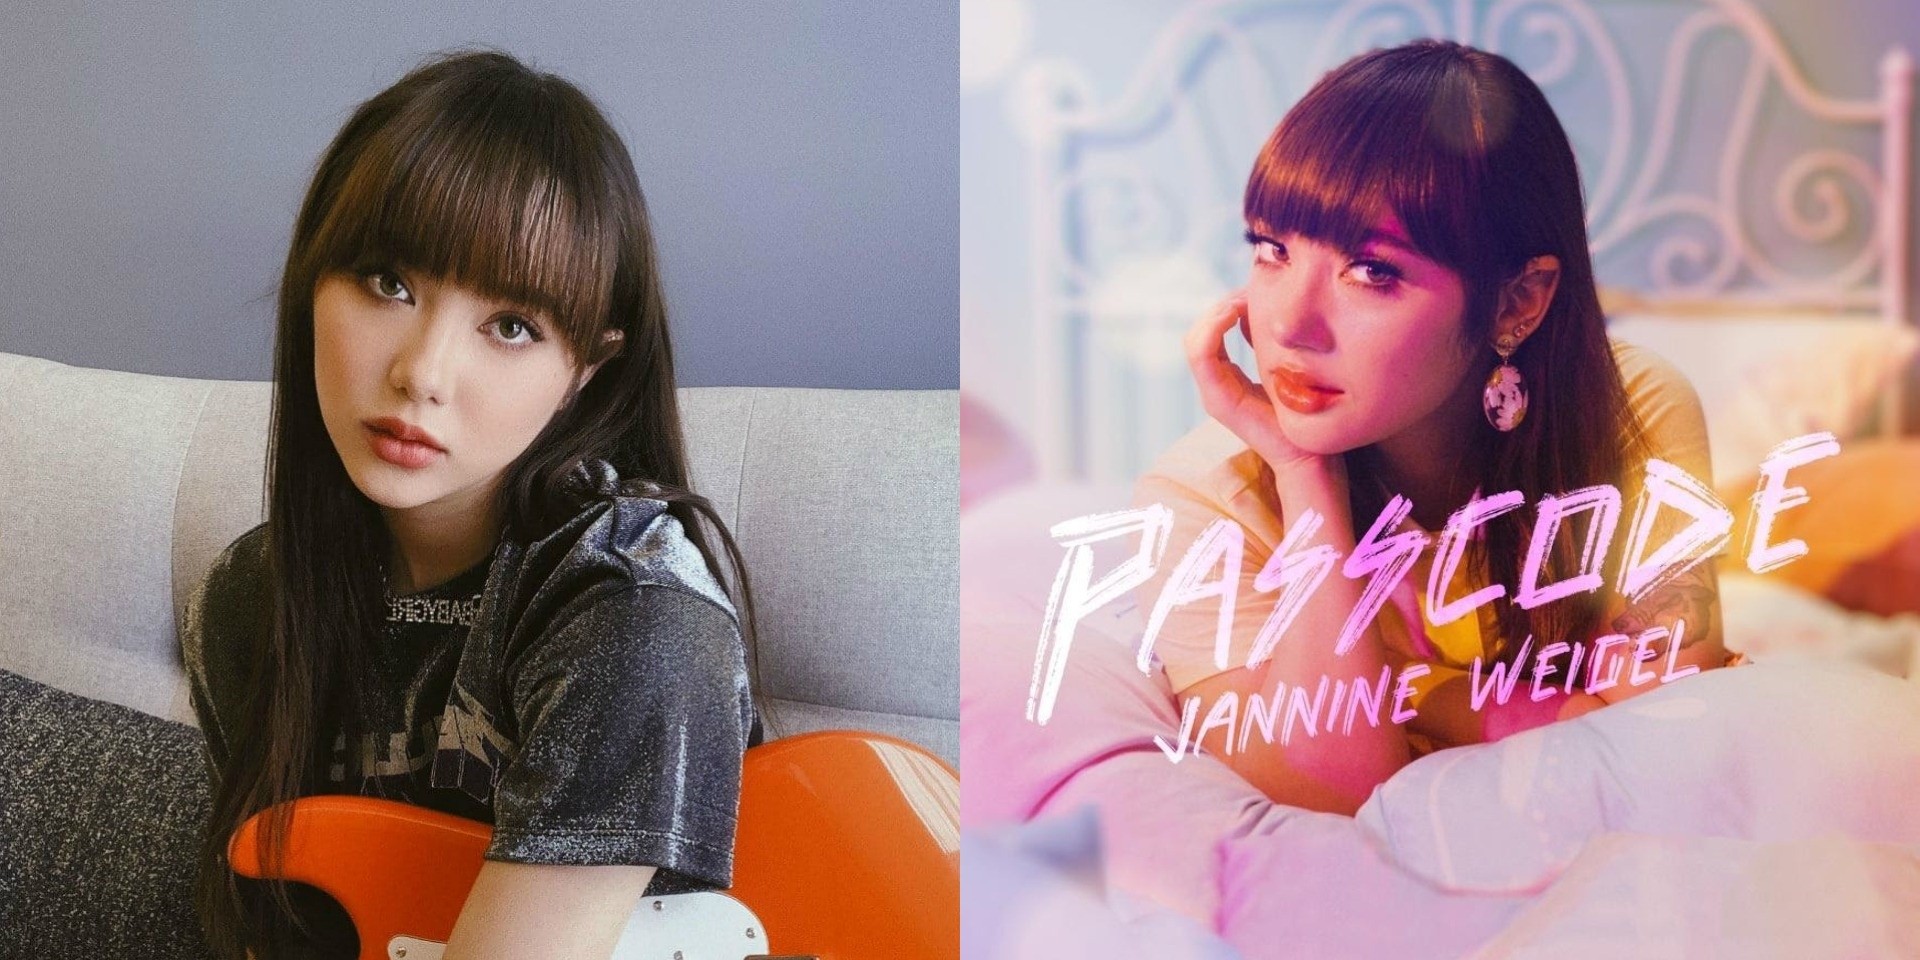 RedRecords’ first artist Jannine Weigel to debut with new single ‘Passcode’